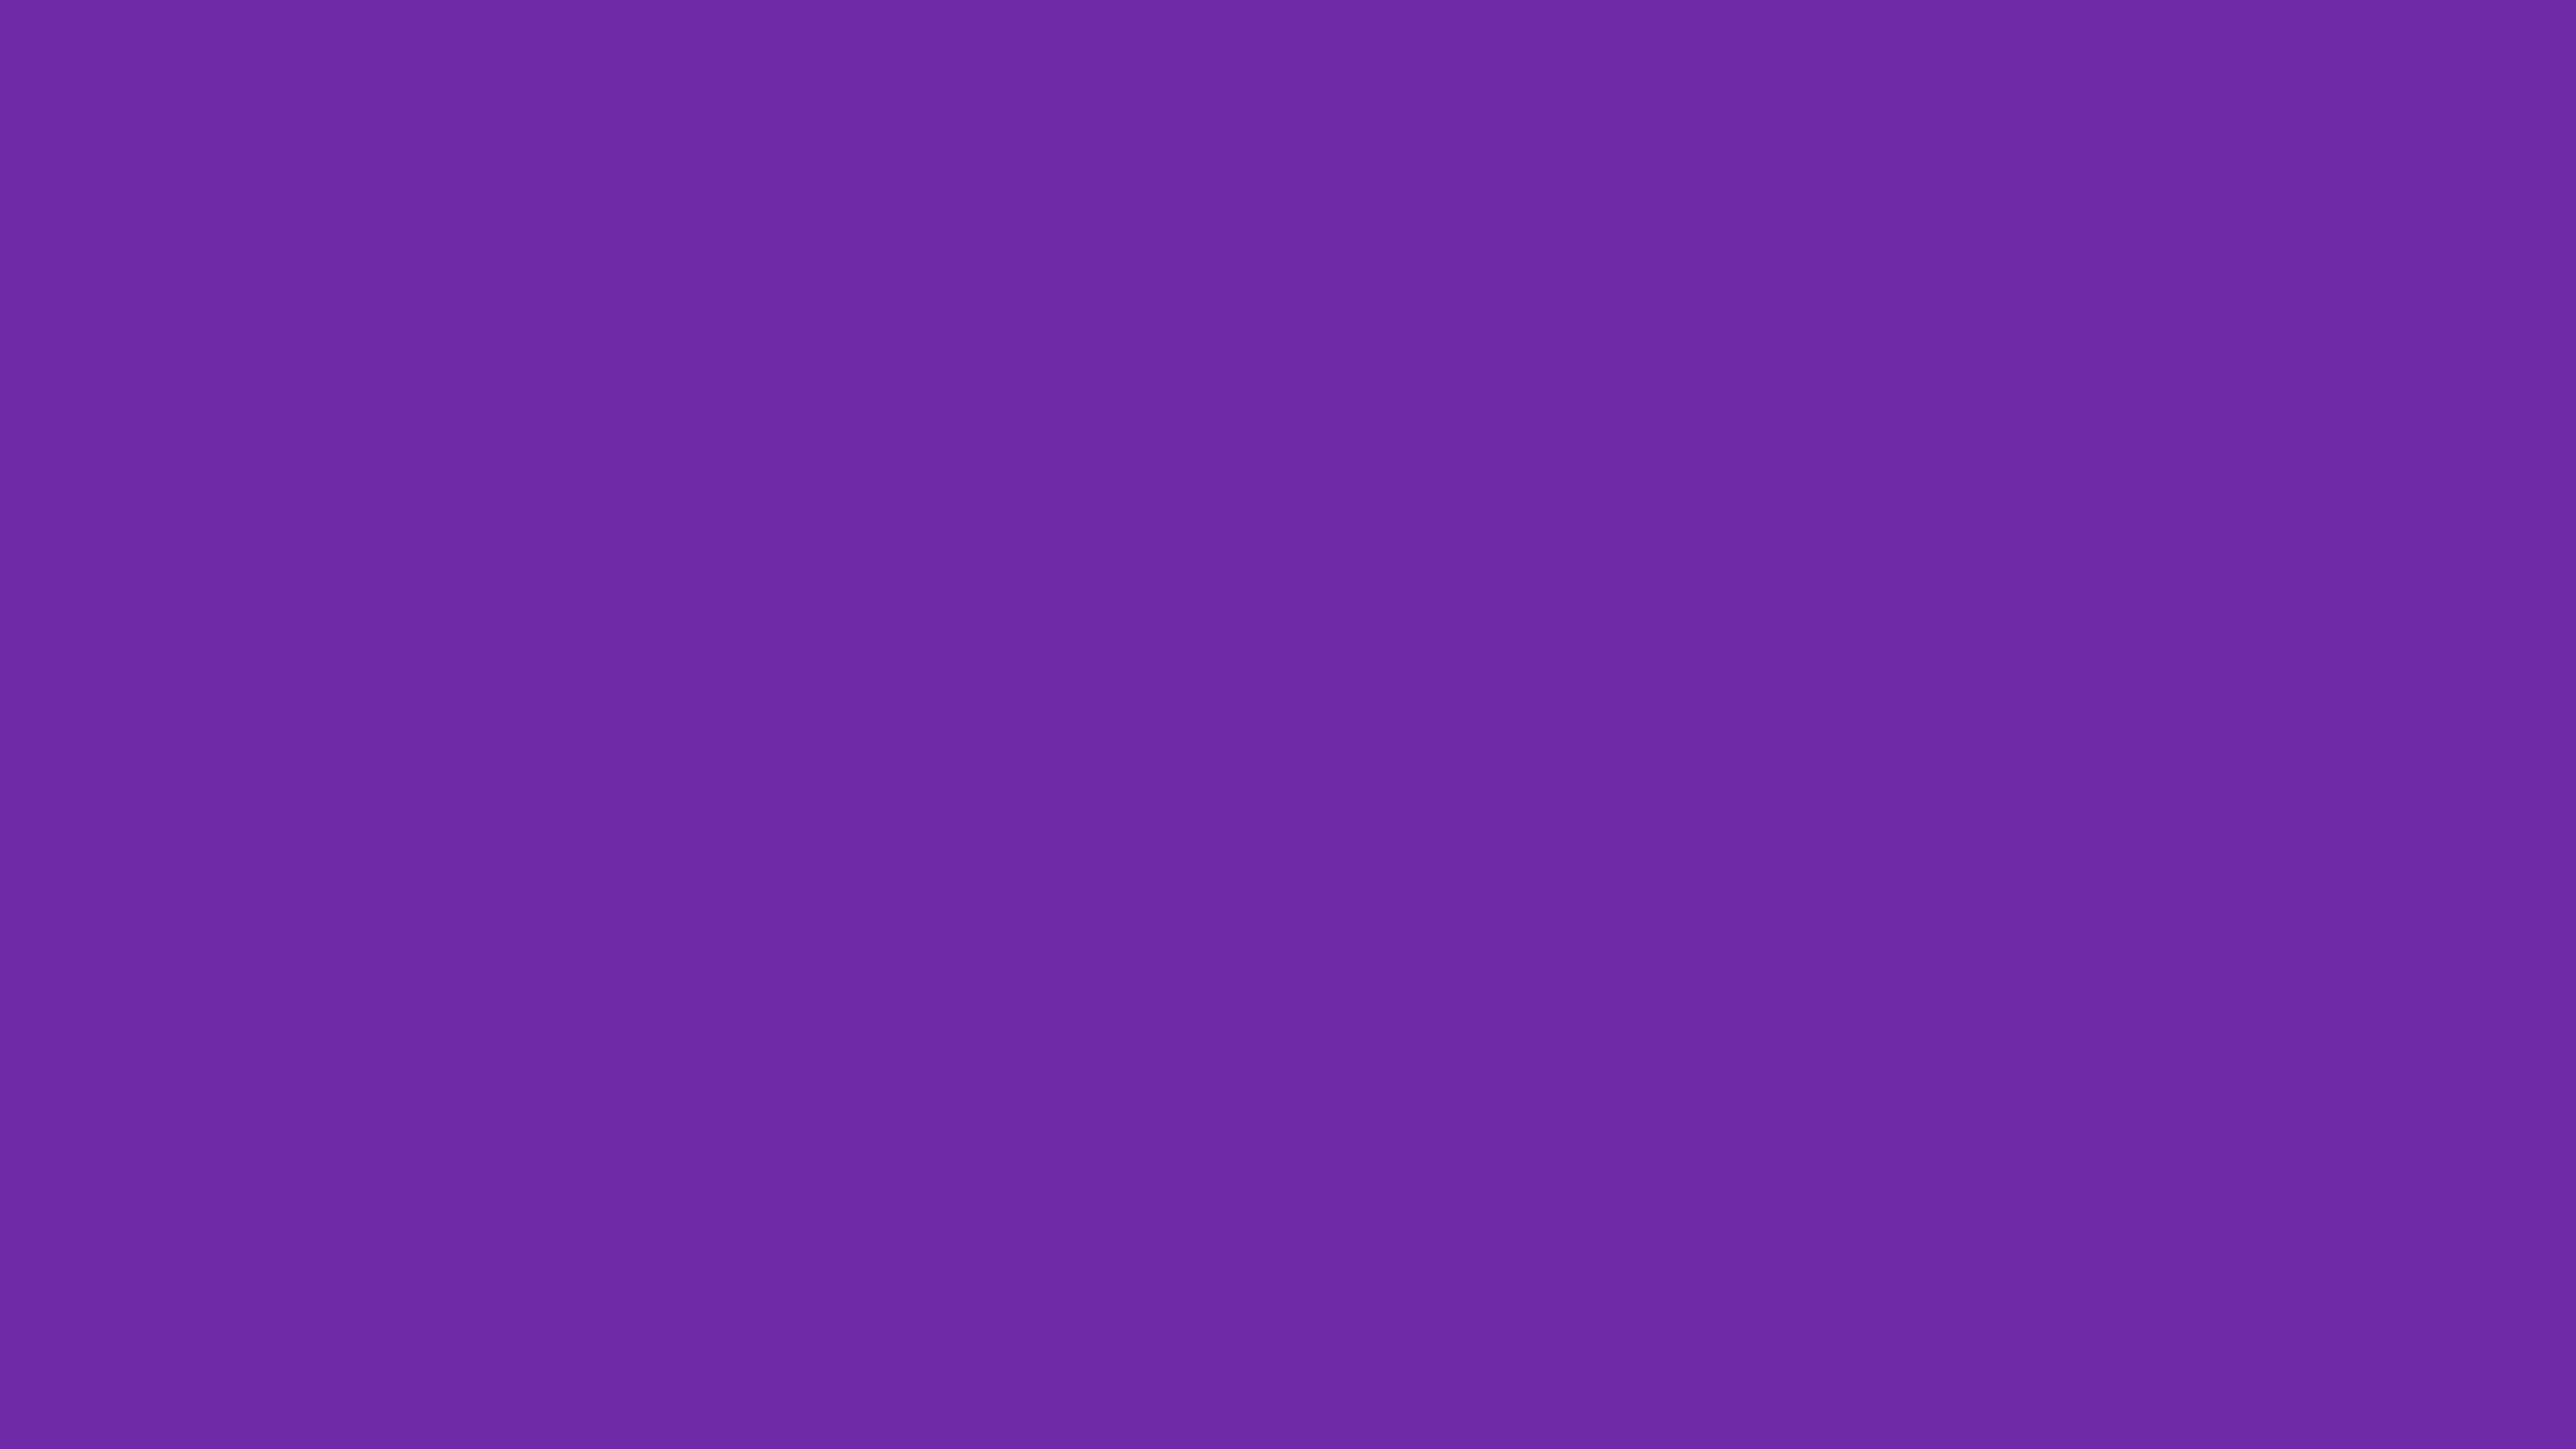 4096x2304 Grape Solid Color Background